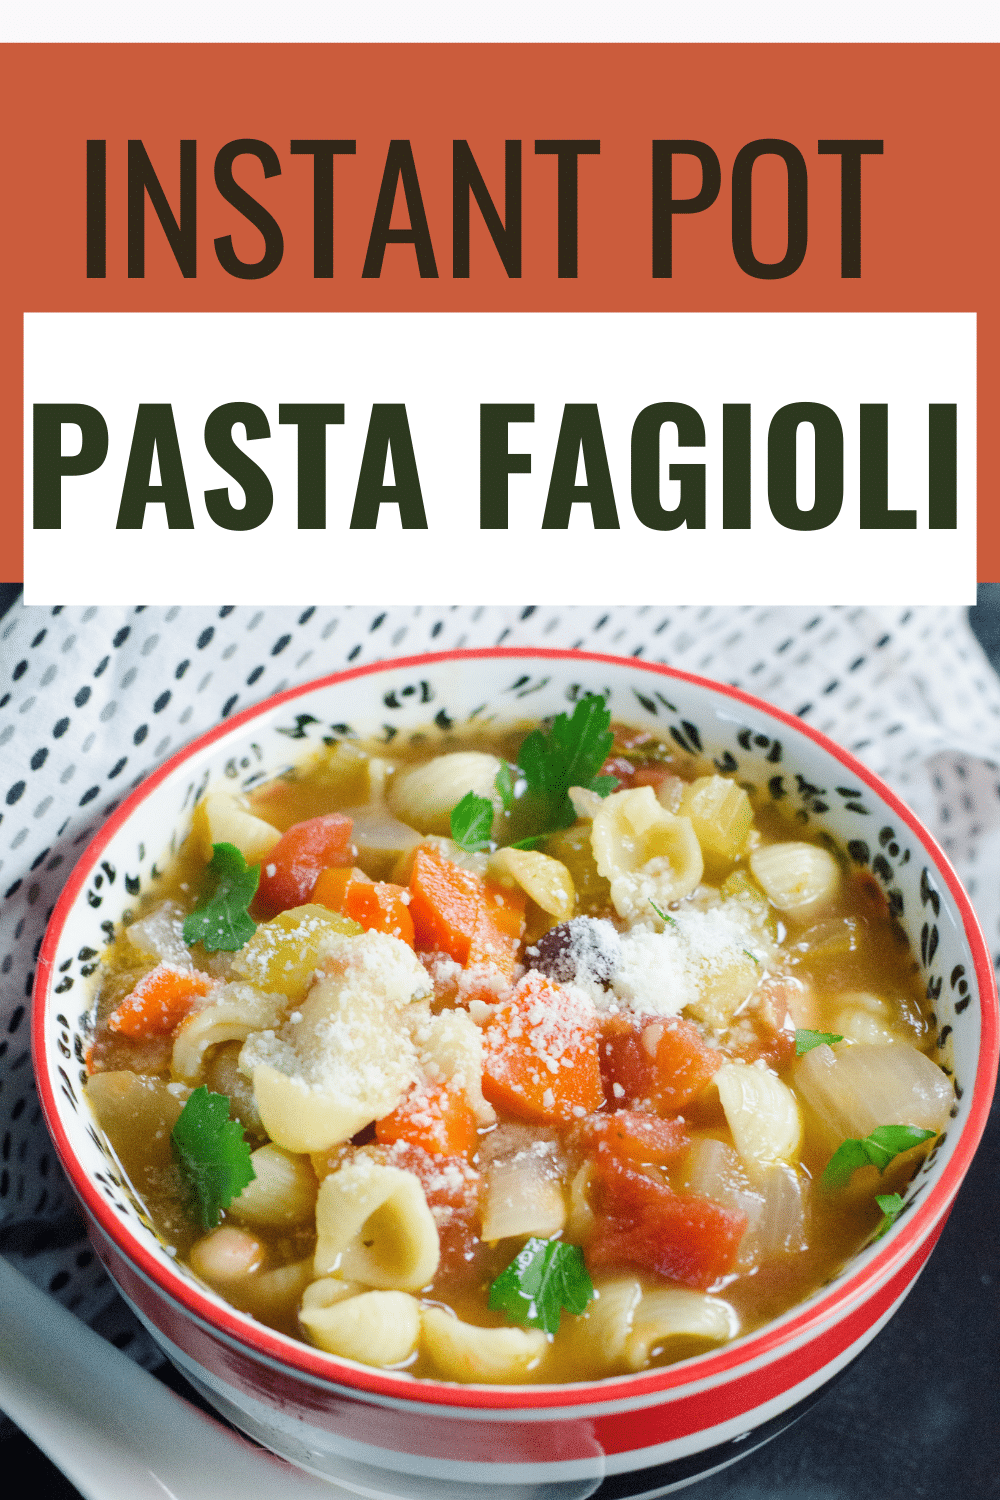 Instant Pot Pasta Fagioli in a bowl garnished with parsley leaves and parmesan cheese next to a cloth with title text reading Instant Pot Pasta Fagioli